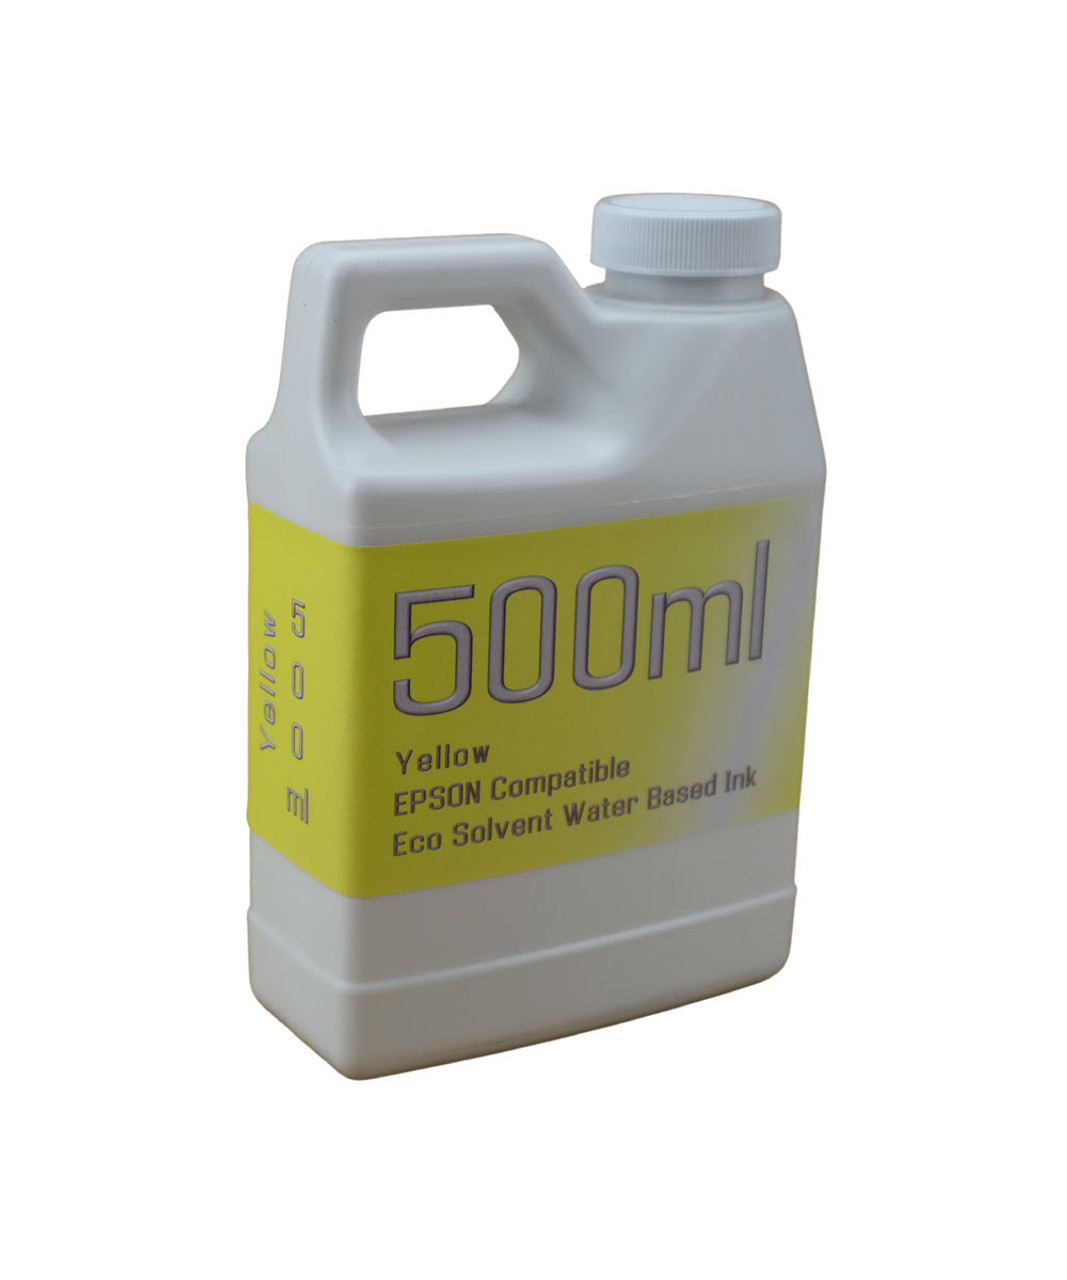 Yellow Water Based Eco Solvent Ink 500ml Bottle for Epson SureColor T3000 T5000 T7000 Printers